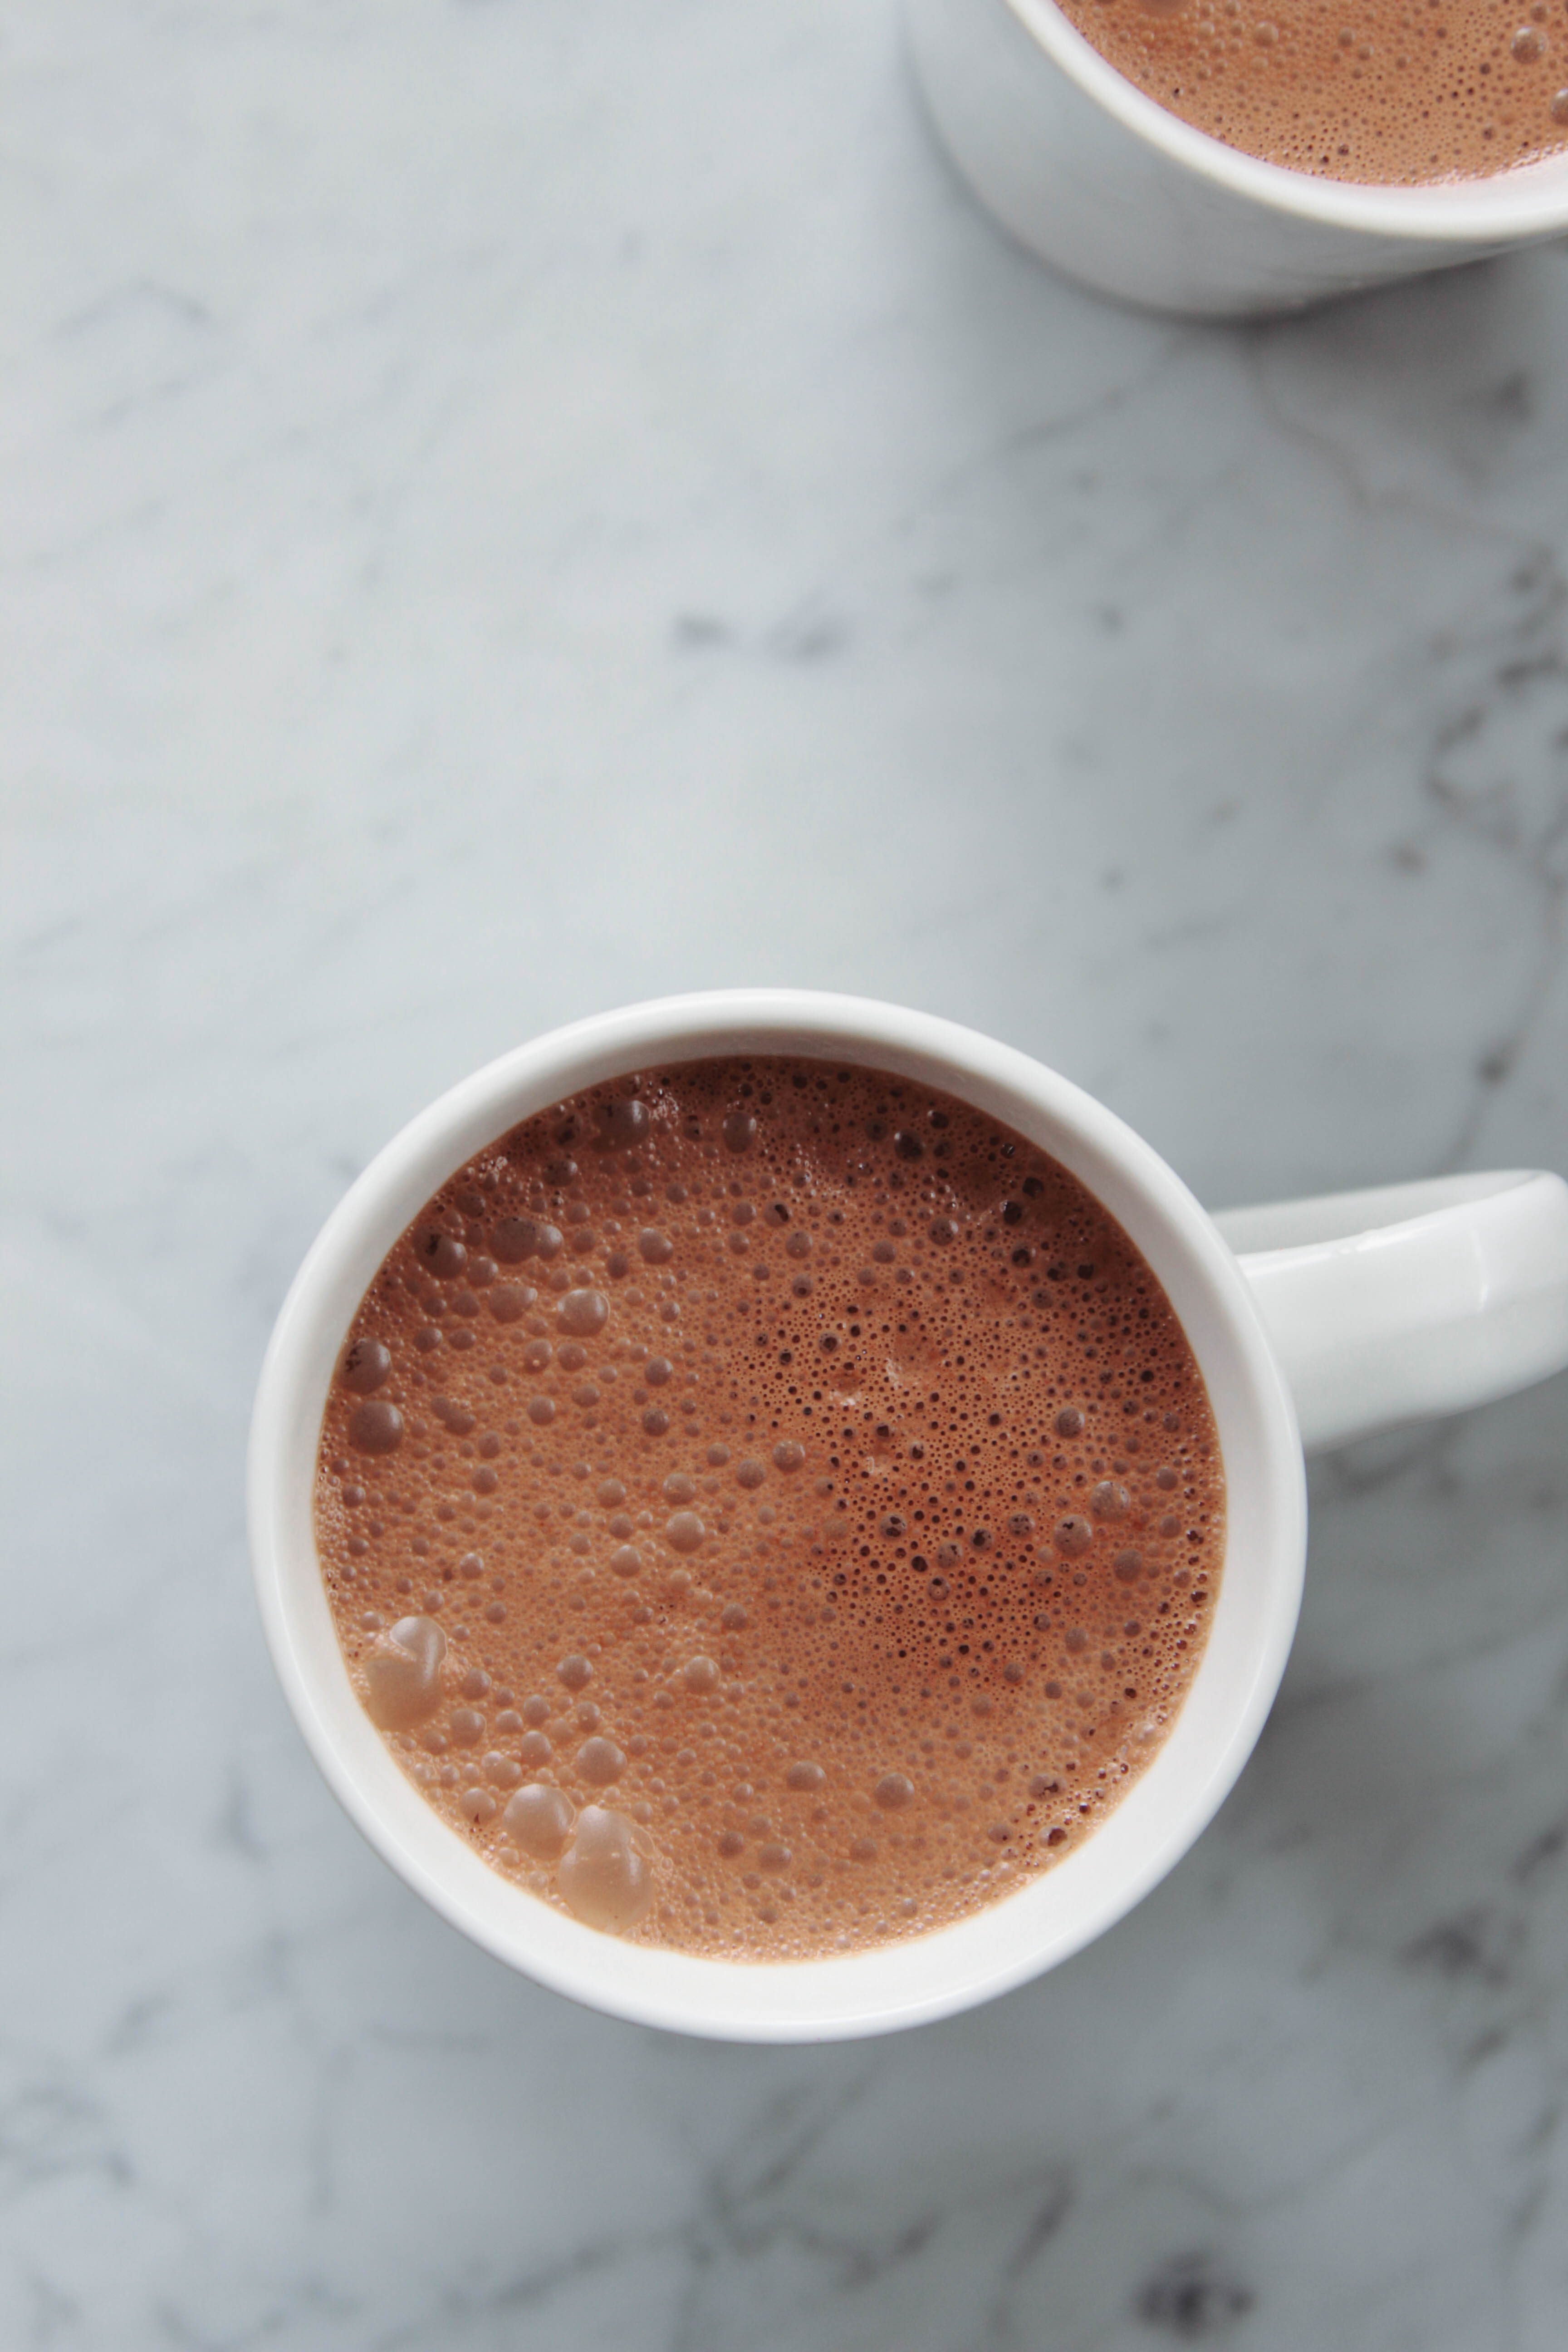 Superfood Hot Chocolate | This healthier hot chocolate is rich, decadent, and deliciously smooth.  Perfect for snowy days & post-sledding coziness!